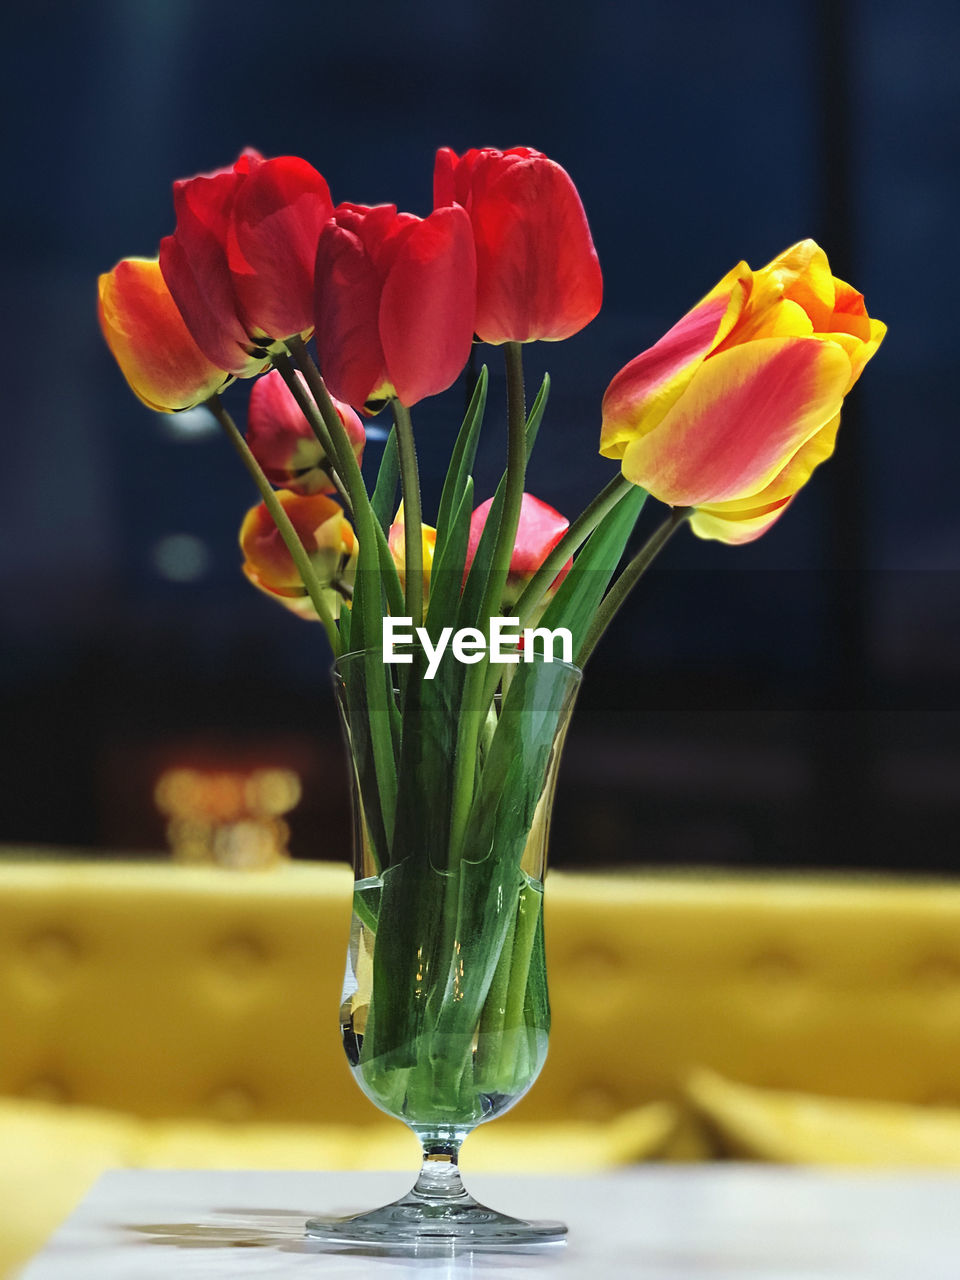 flower, flowering plant, plant, freshness, yellow, vase, beauty in nature, nature, tulip, flower arrangement, flower head, floristry, close-up, indoors, table, fragility, no people, arrangement, bouquet, focus on foreground, inflorescence, petal, bunch of flowers, cut flowers, glass, still life, floral design, decoration, centrepiece, red, rose